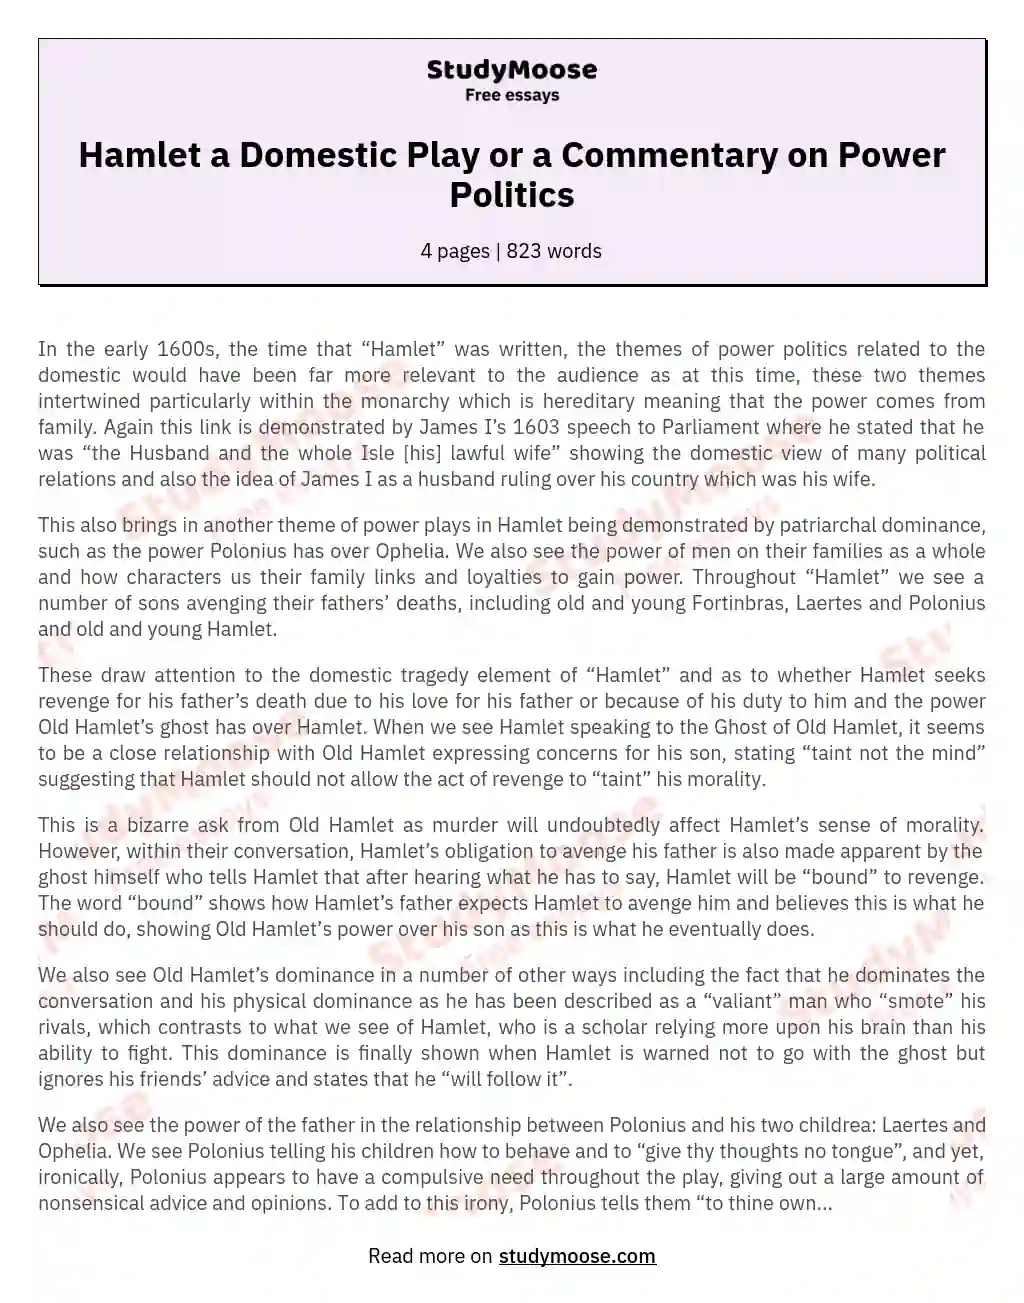 Hamlet a Domestic Play or a Commentary on Power Politics essay